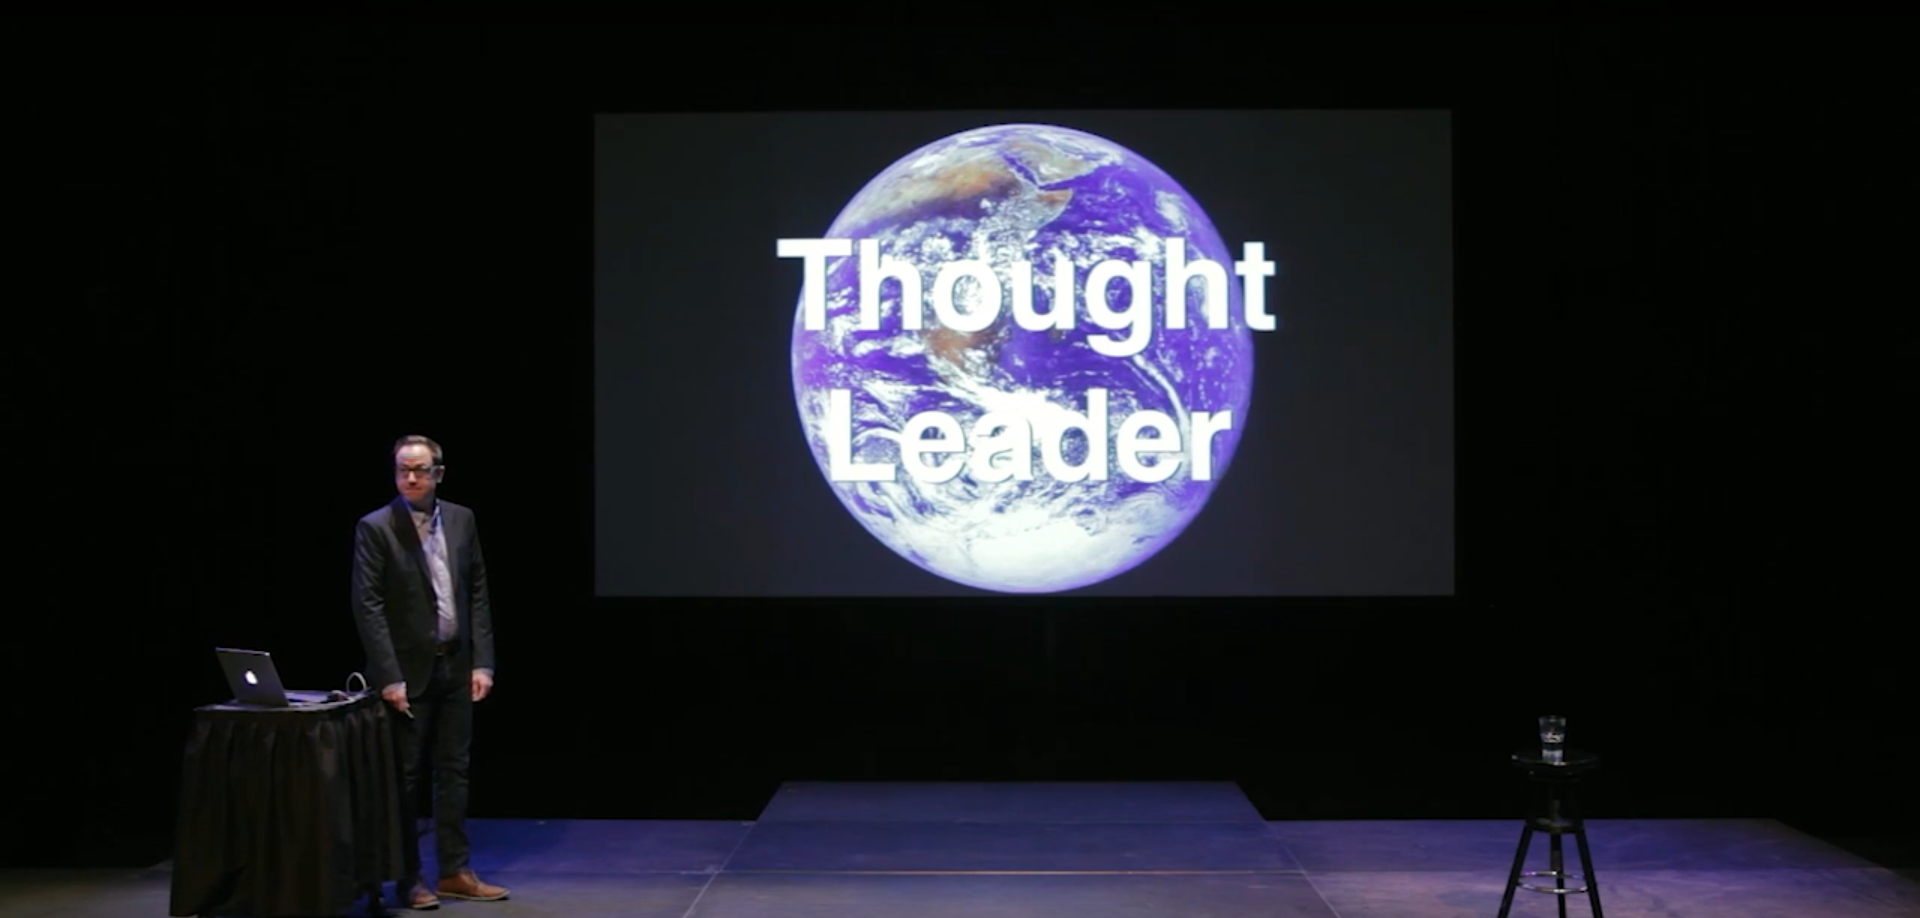 WATCH: How to be a ‘Thought Leader’